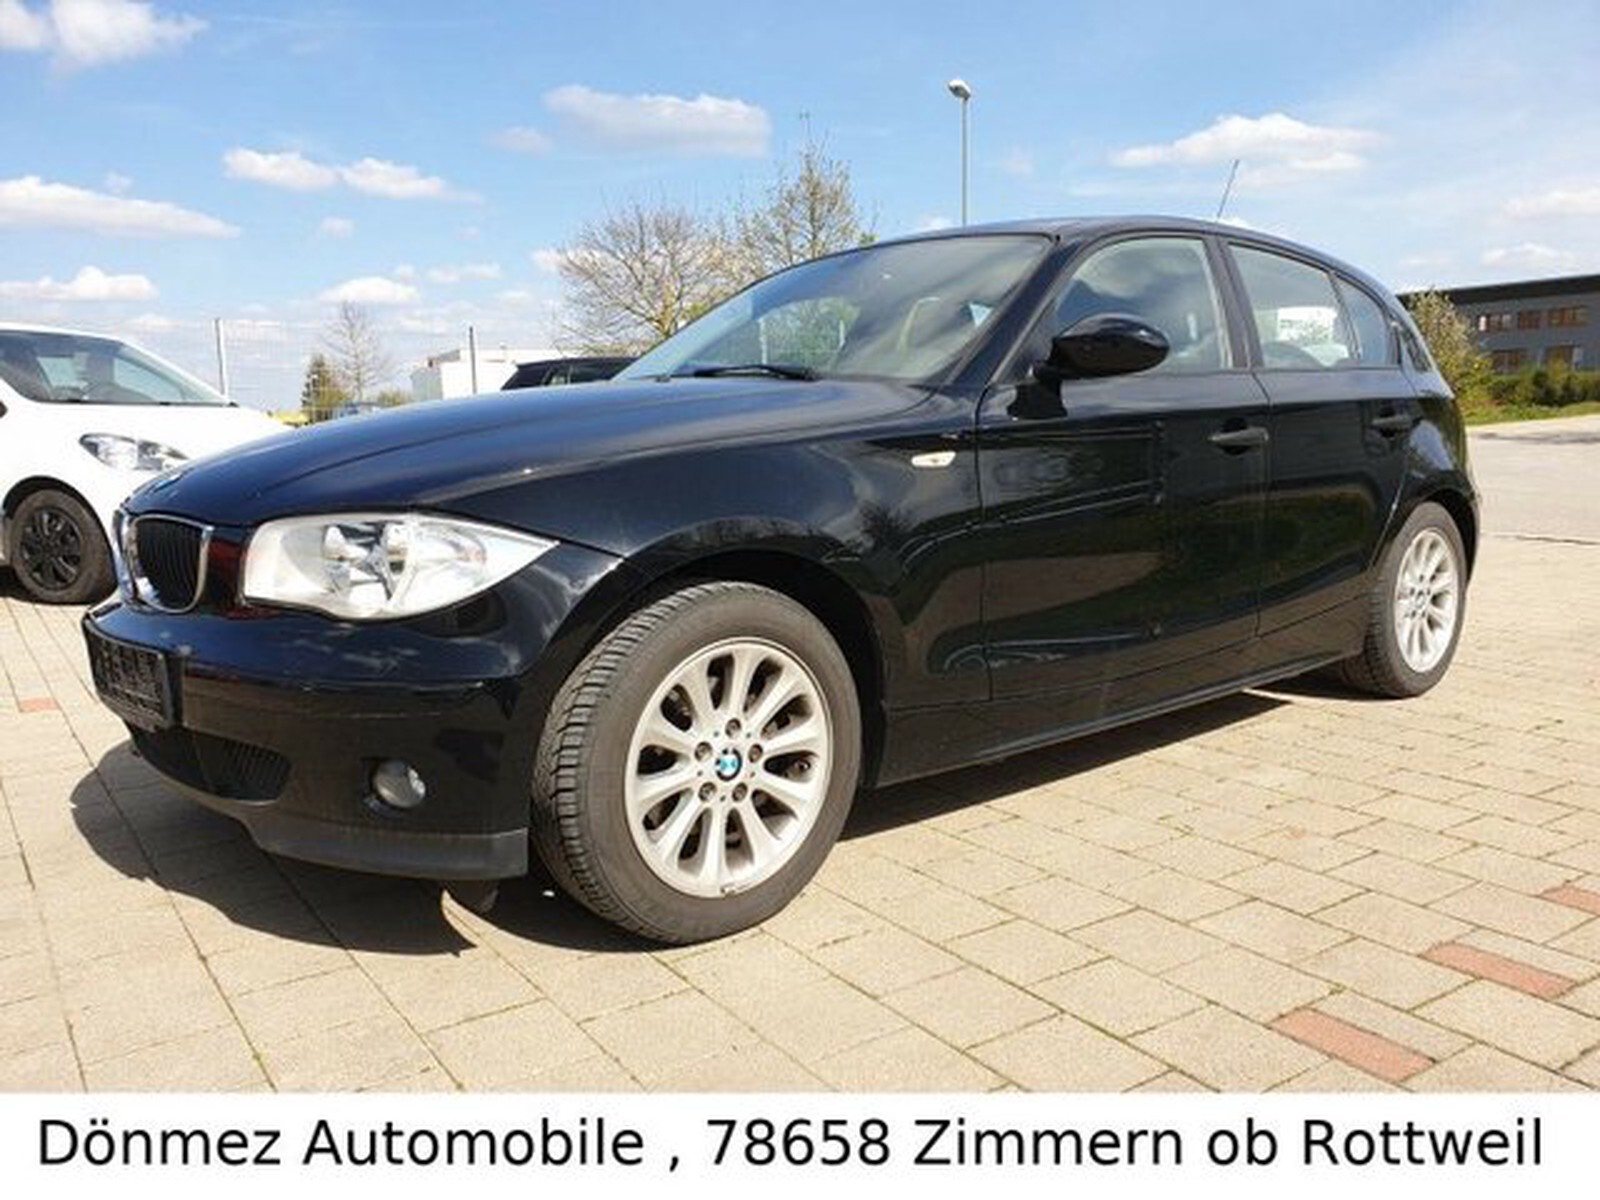 Bmw 116 Used Buy In Zimmern Ob Rottweil Price 4490 Eur Int Nr 223 Sold